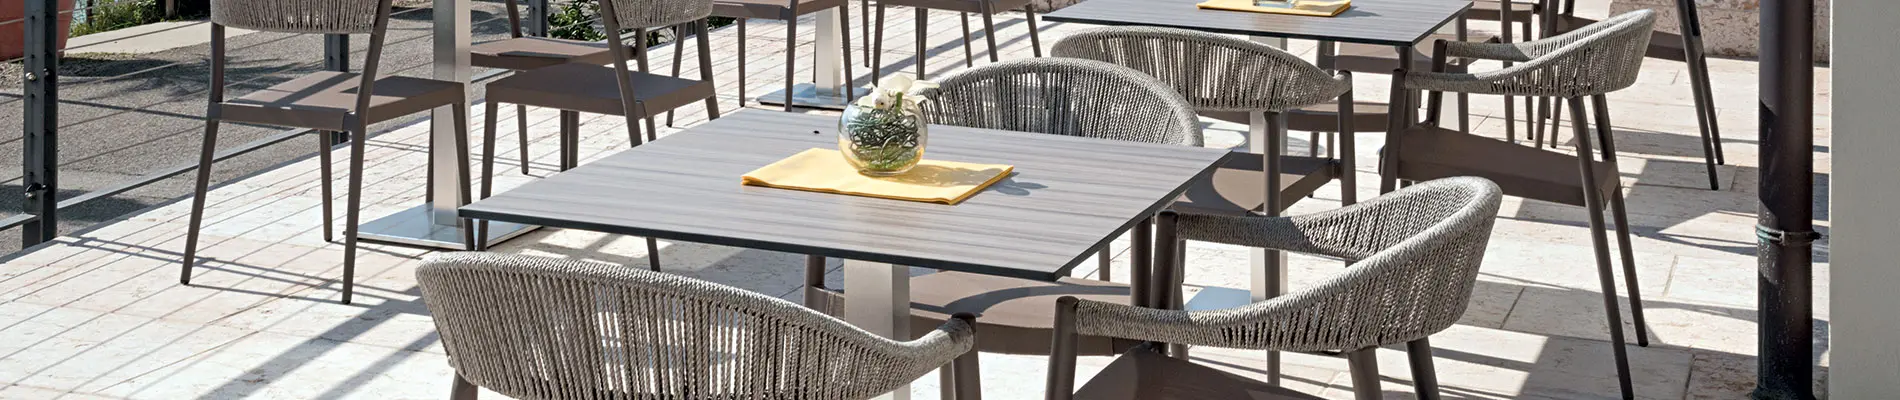 Outdoor table tops